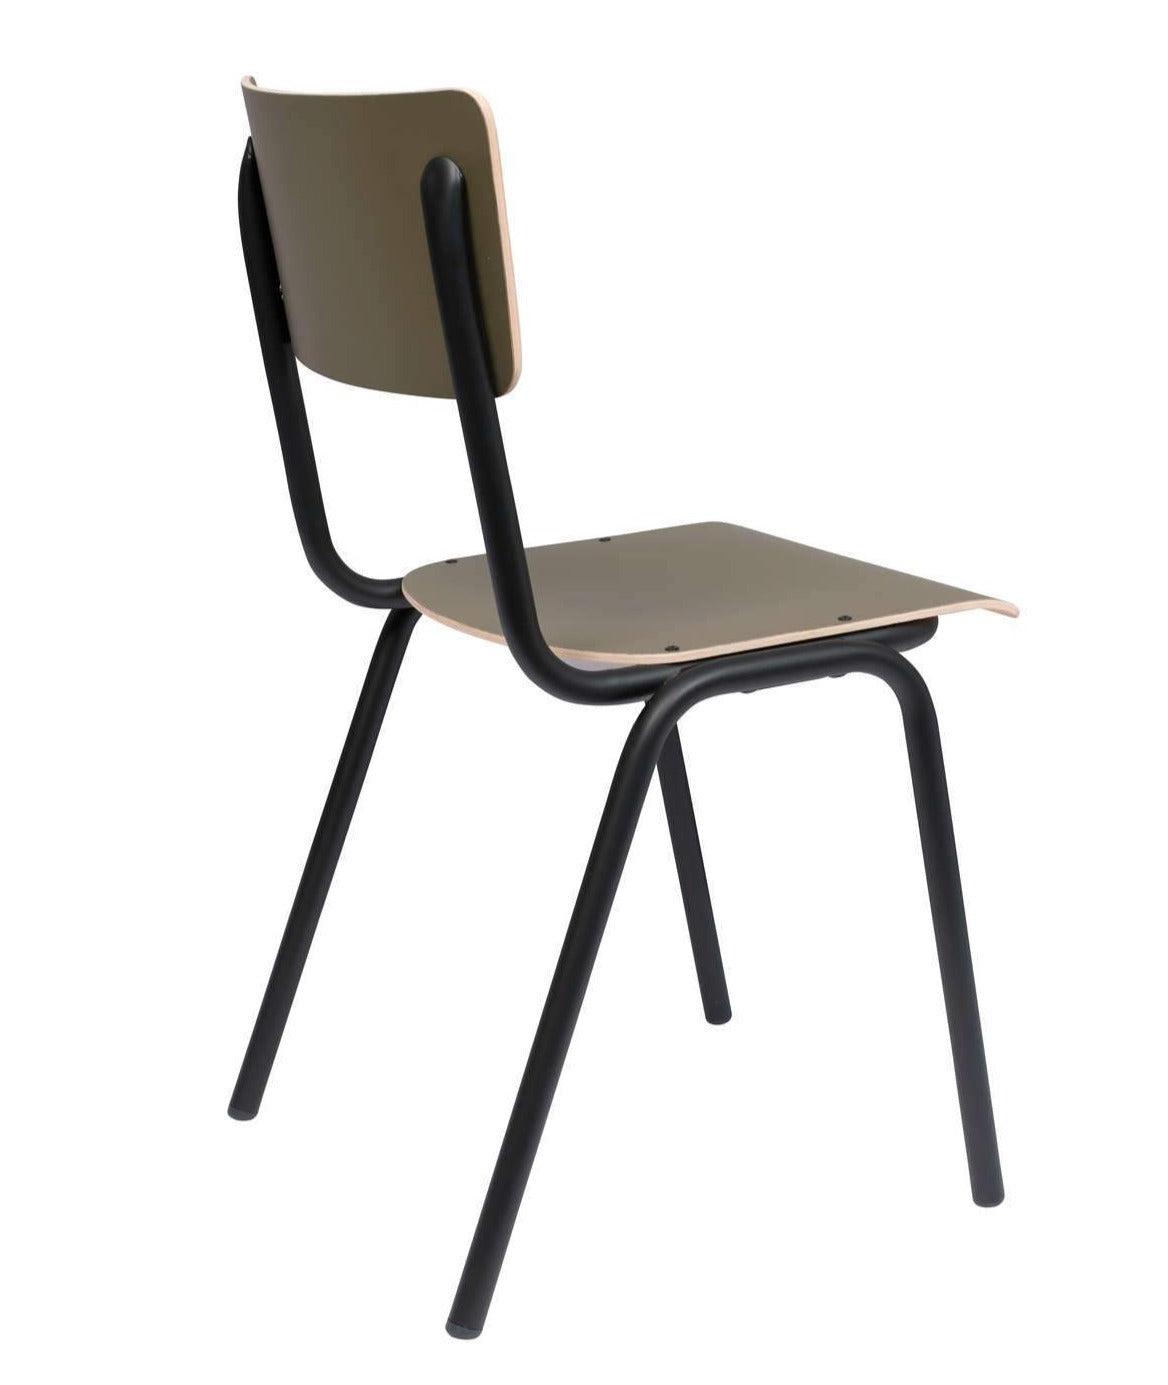 BACK TO SCHOOL chair olive, Zuiver, Eye on Design